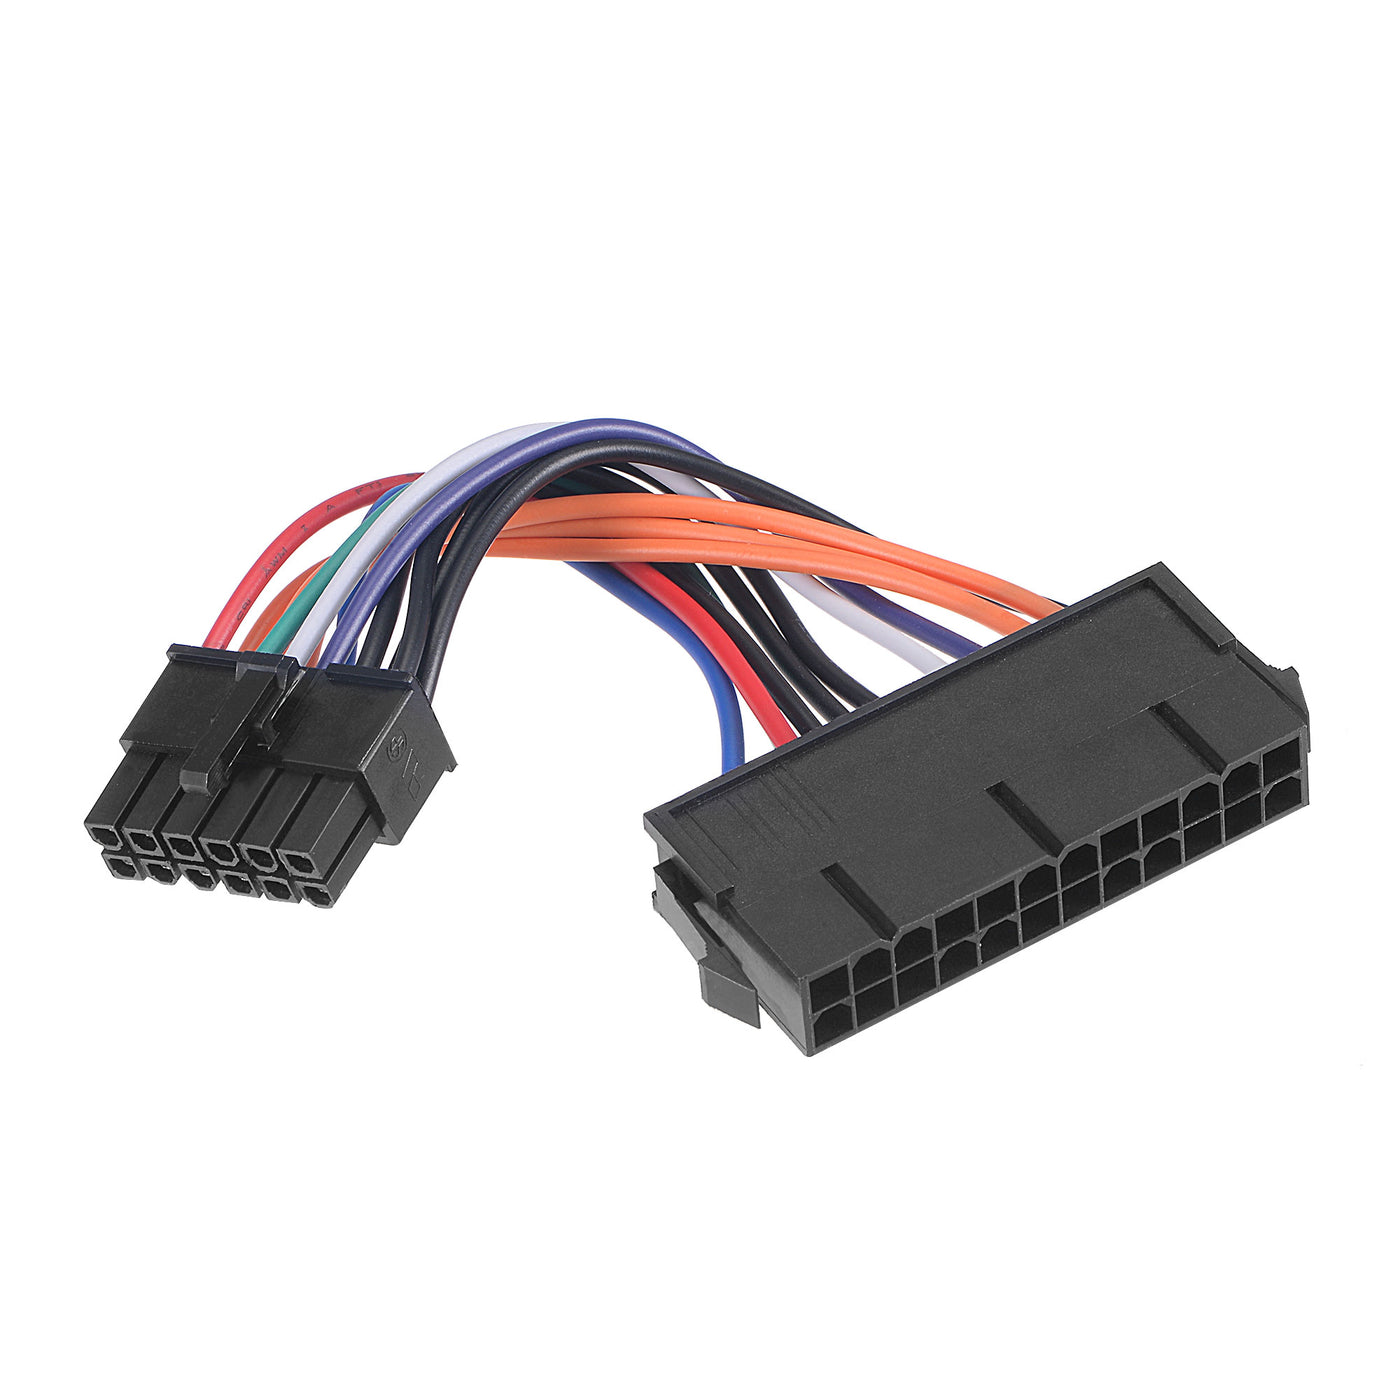 uxcell Uxcell 24 to 12 Pin Mainboard Power Cable for Modular Board 18 AWG 13cm